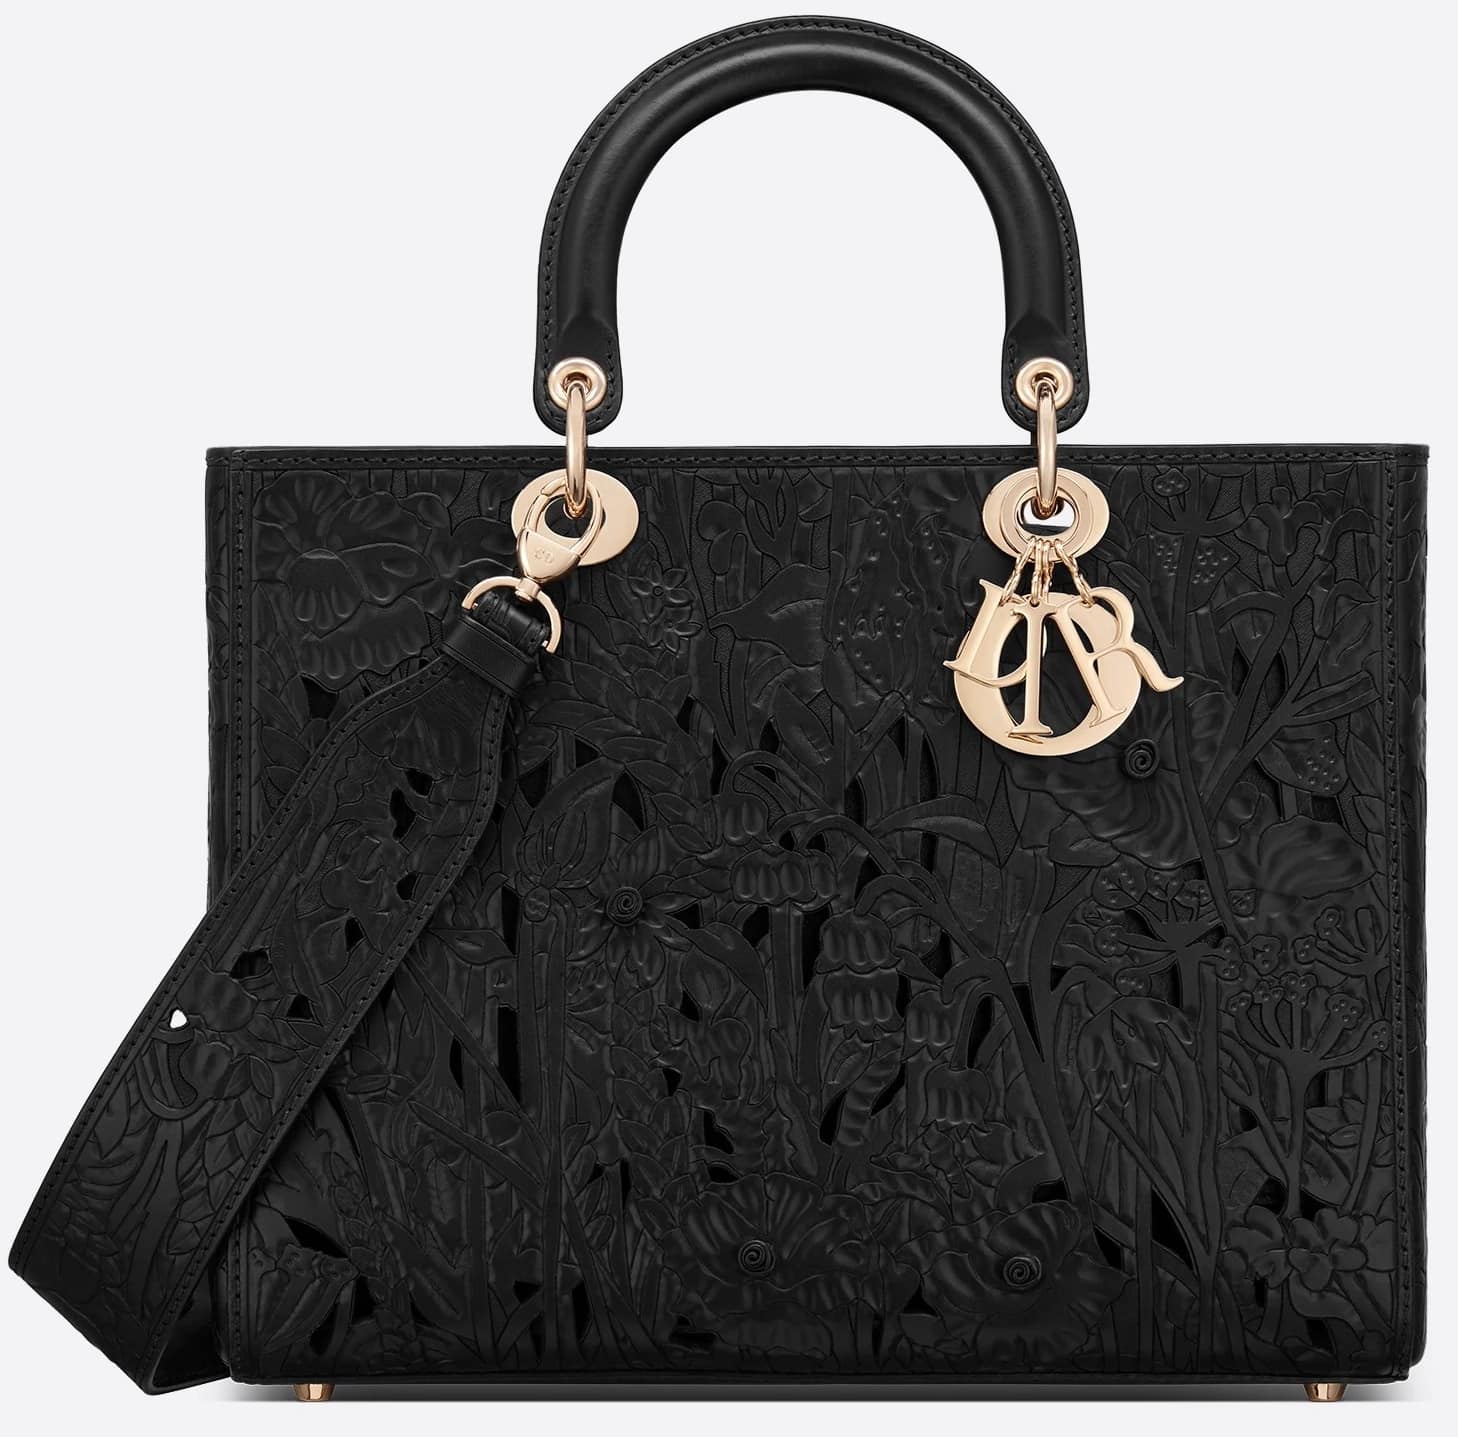 One of the most expensive Christian Dior bags, this black hand-embossed calfskin Lady Dior bag retails for $8,000